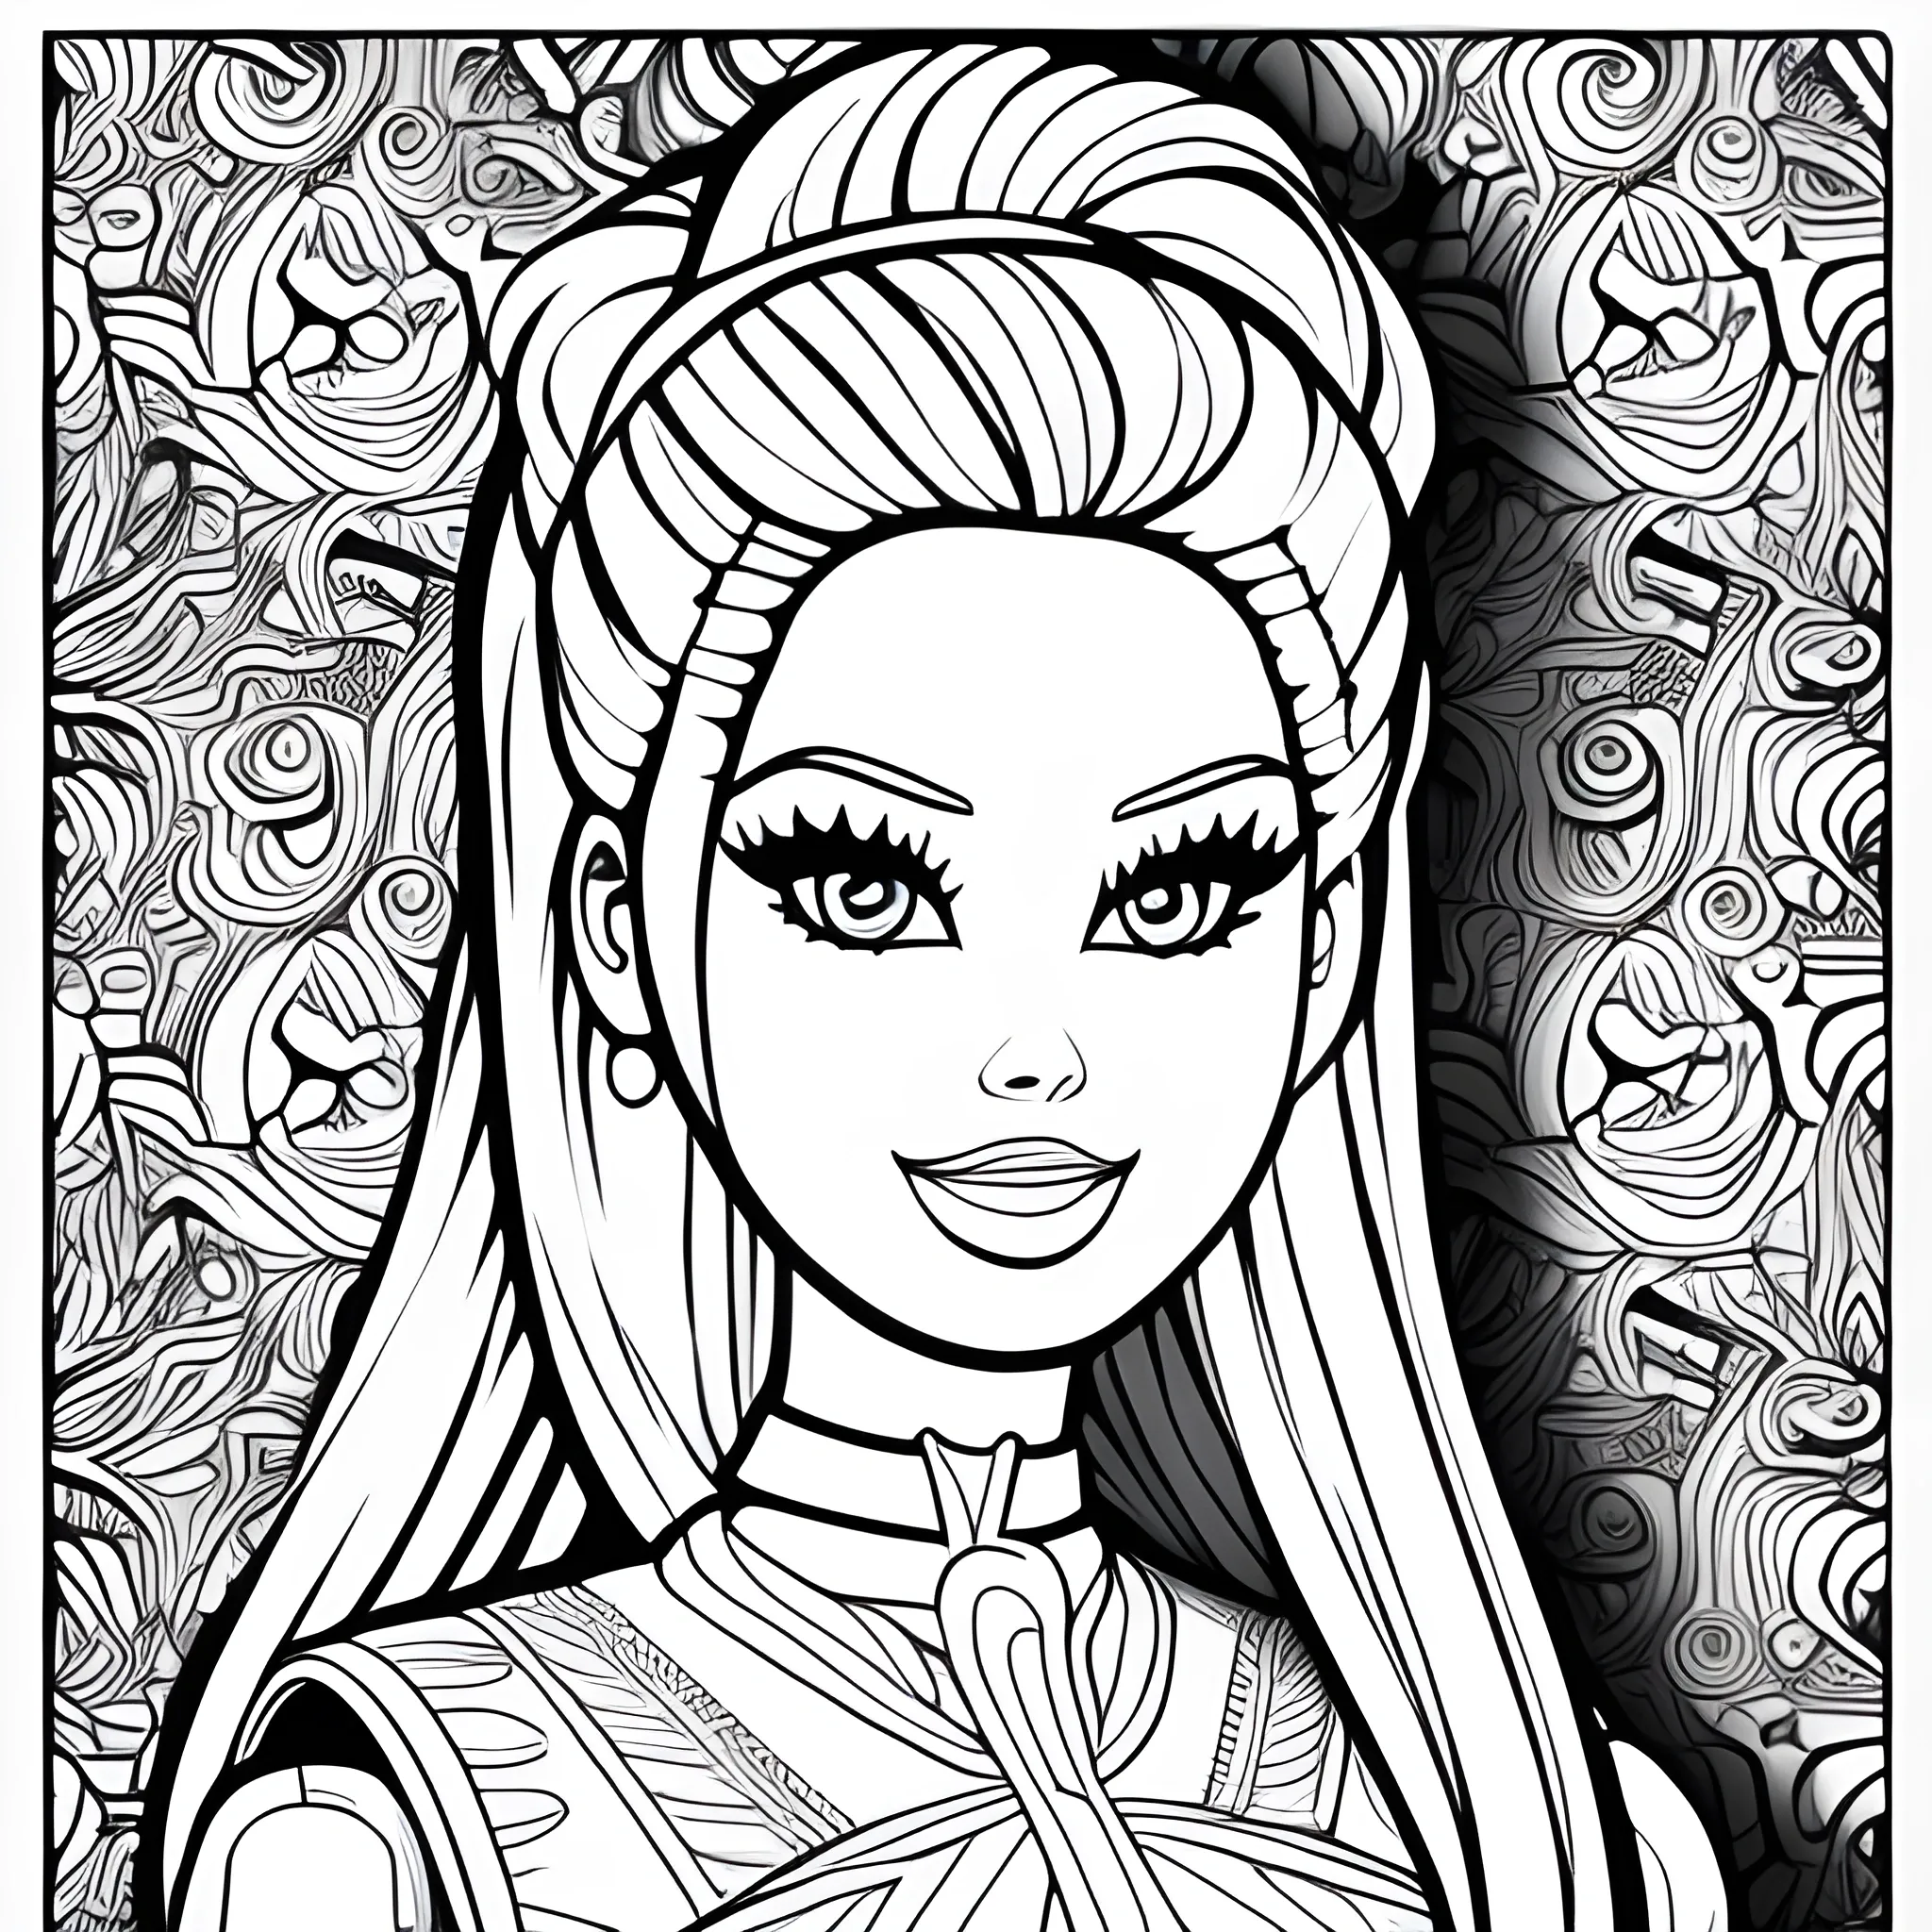 Barbie  in coloring book style, black and white, 